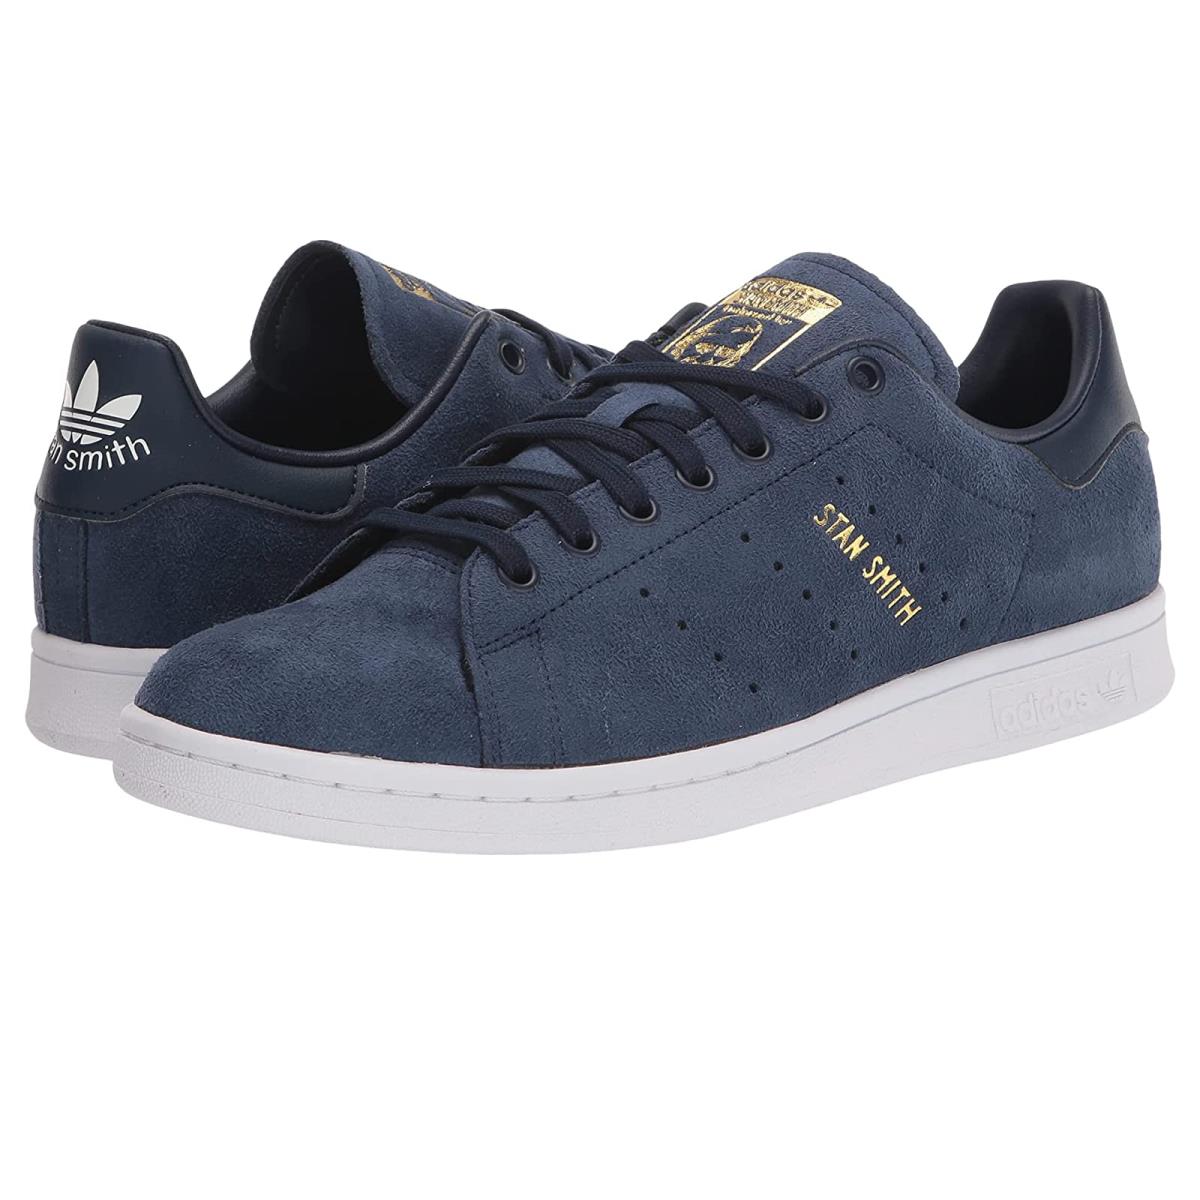 Man`s Sneakers Athletic Shoes Adidas Originals Stan Smith Blue Suede/White/Gold Metallic